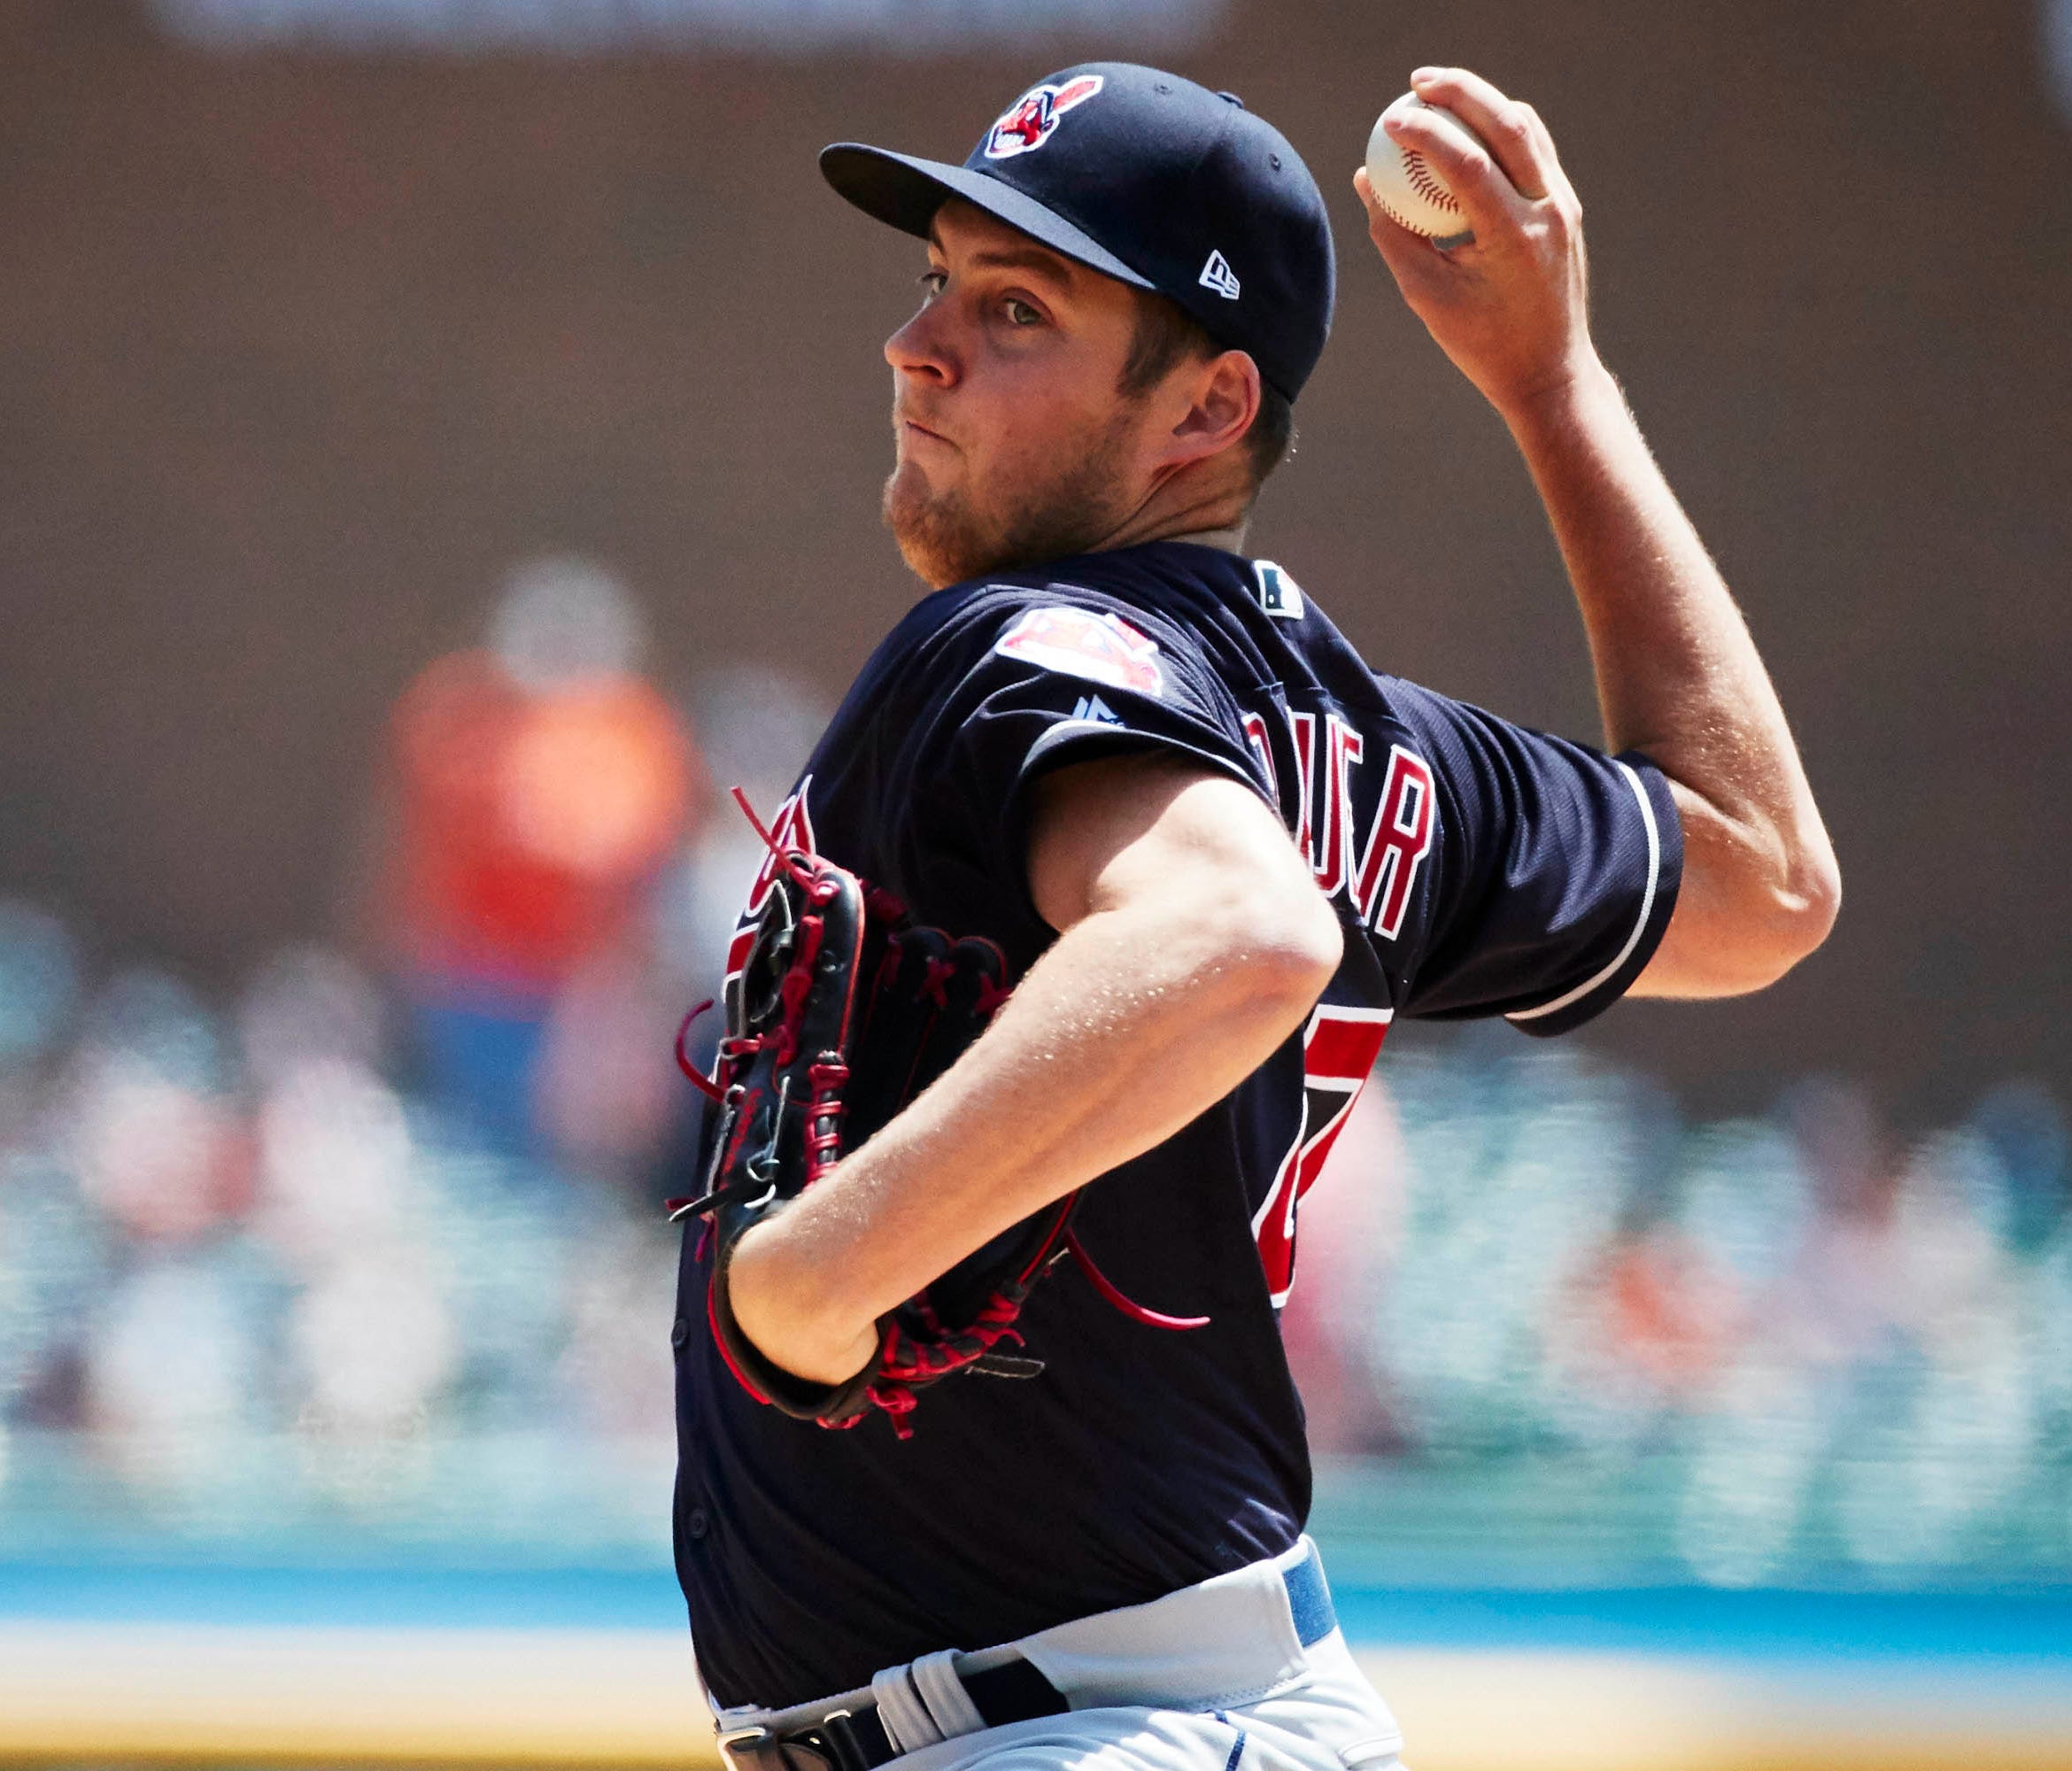 Trevor Bauer is 4-3 this season with the Indians.